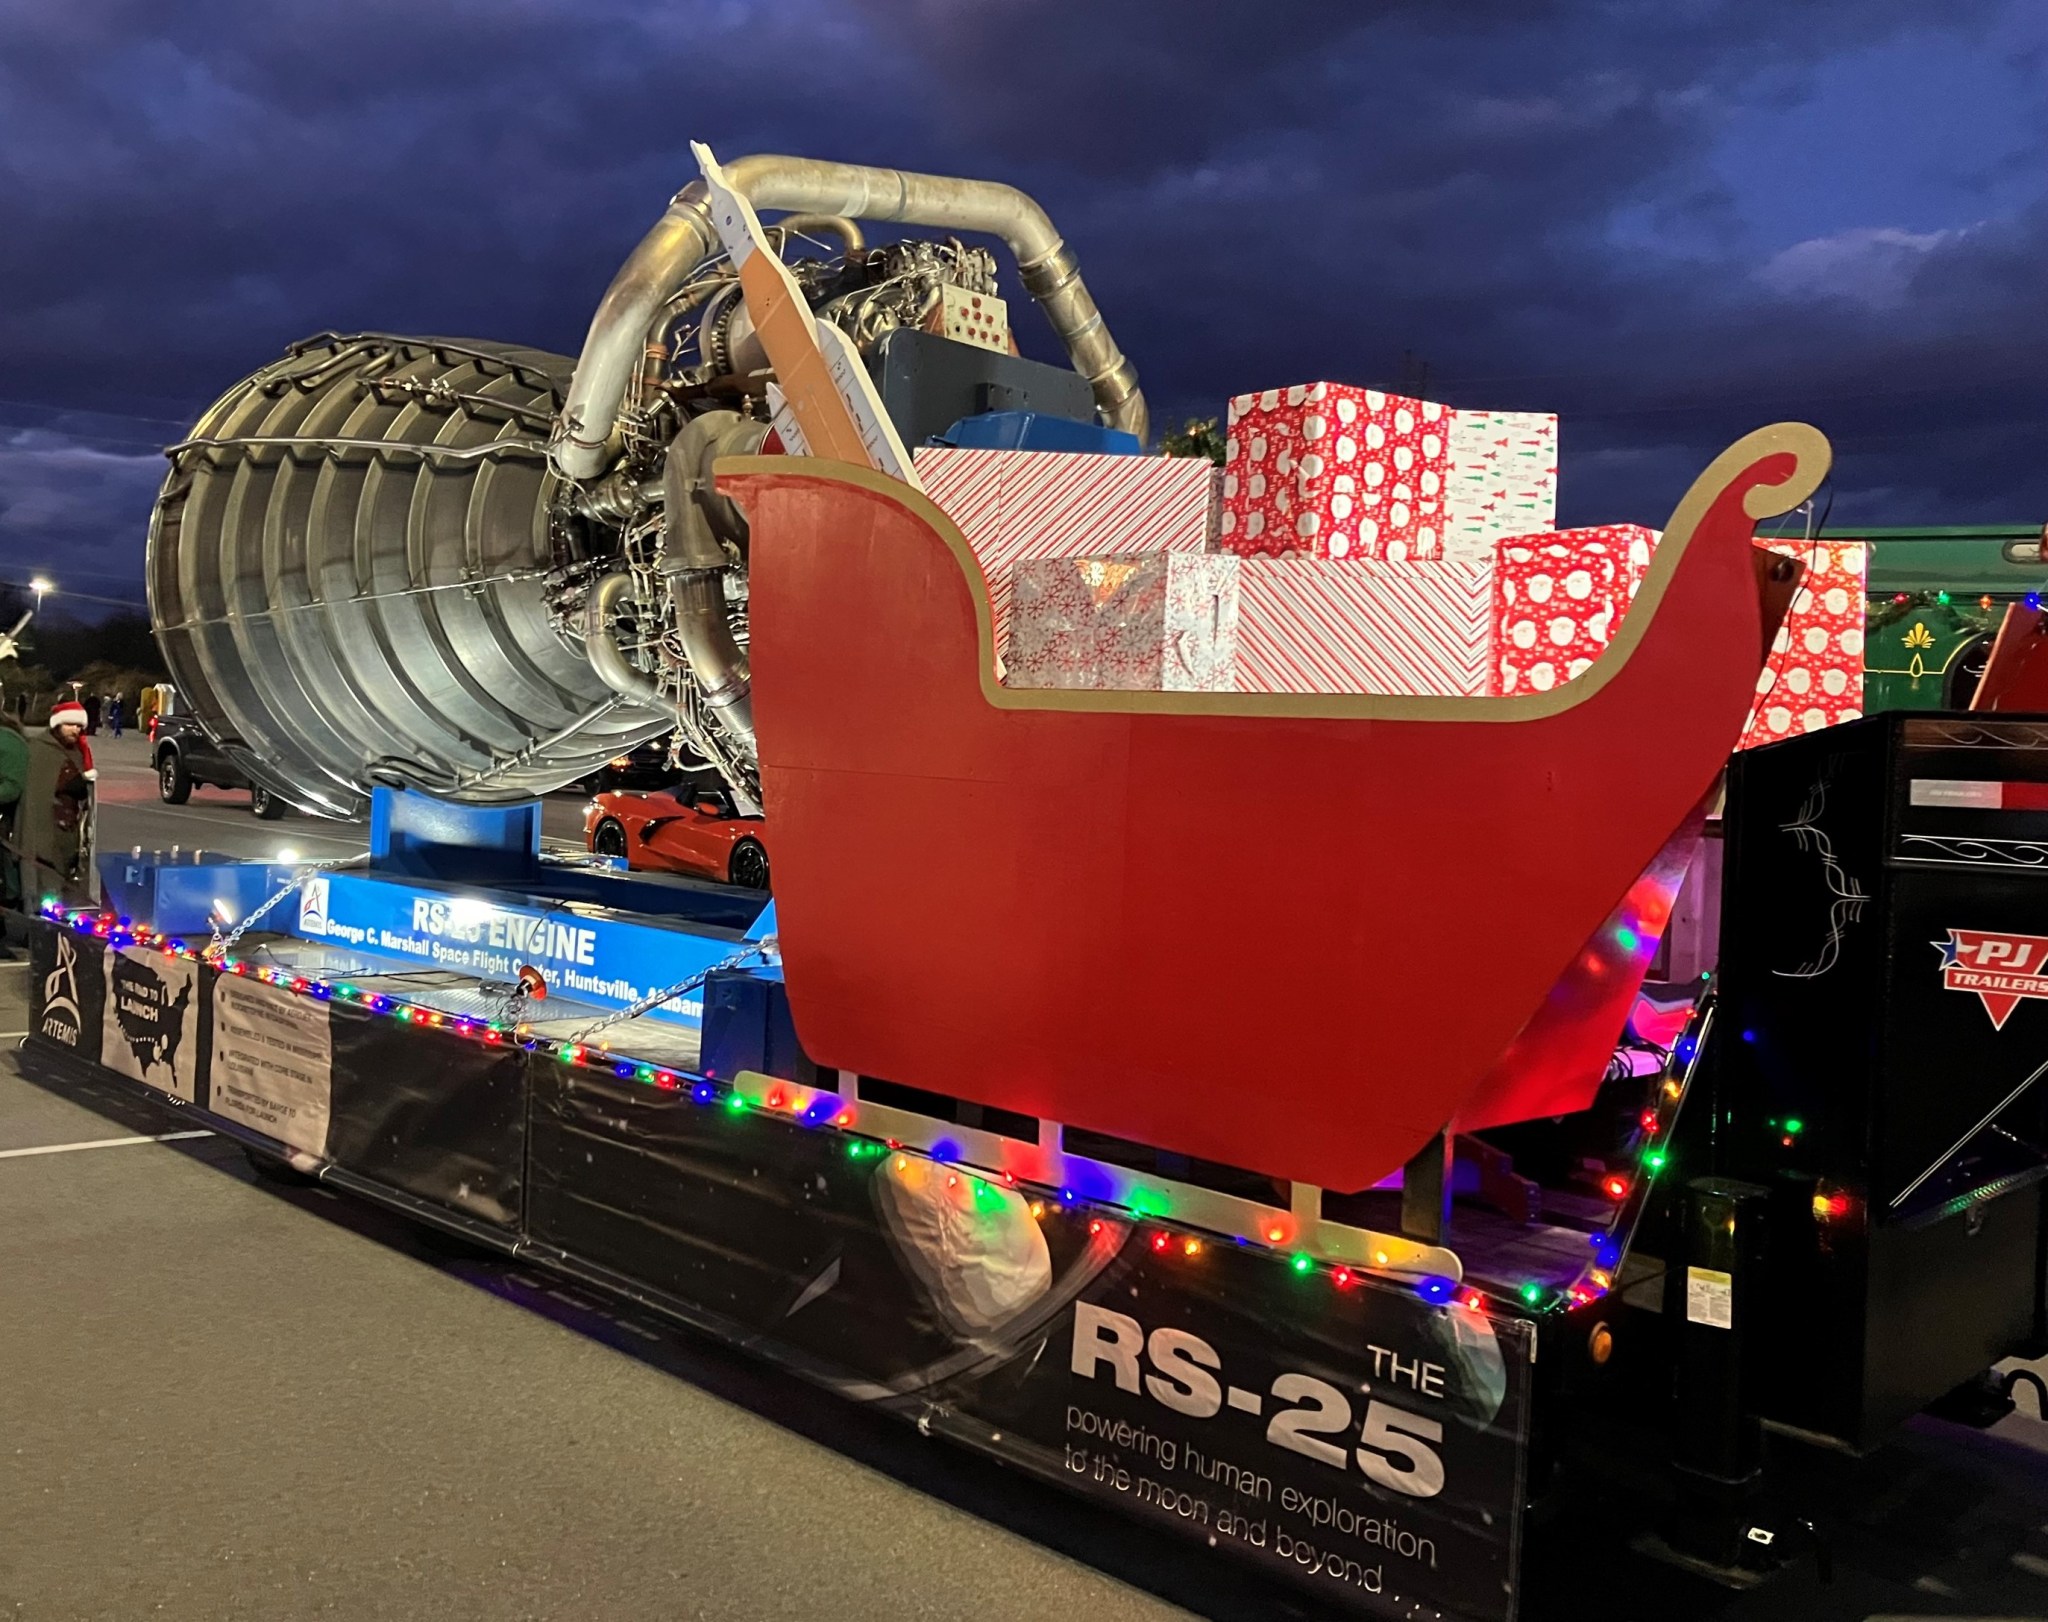 A Santa Claus sleigh, powered by an RS-25 rocket engine, makes its way through the 9th annual Huntsville Christmas Parade on Dec. 5. The float was designed by team members from NASA’s Marshall Space Flight Center.